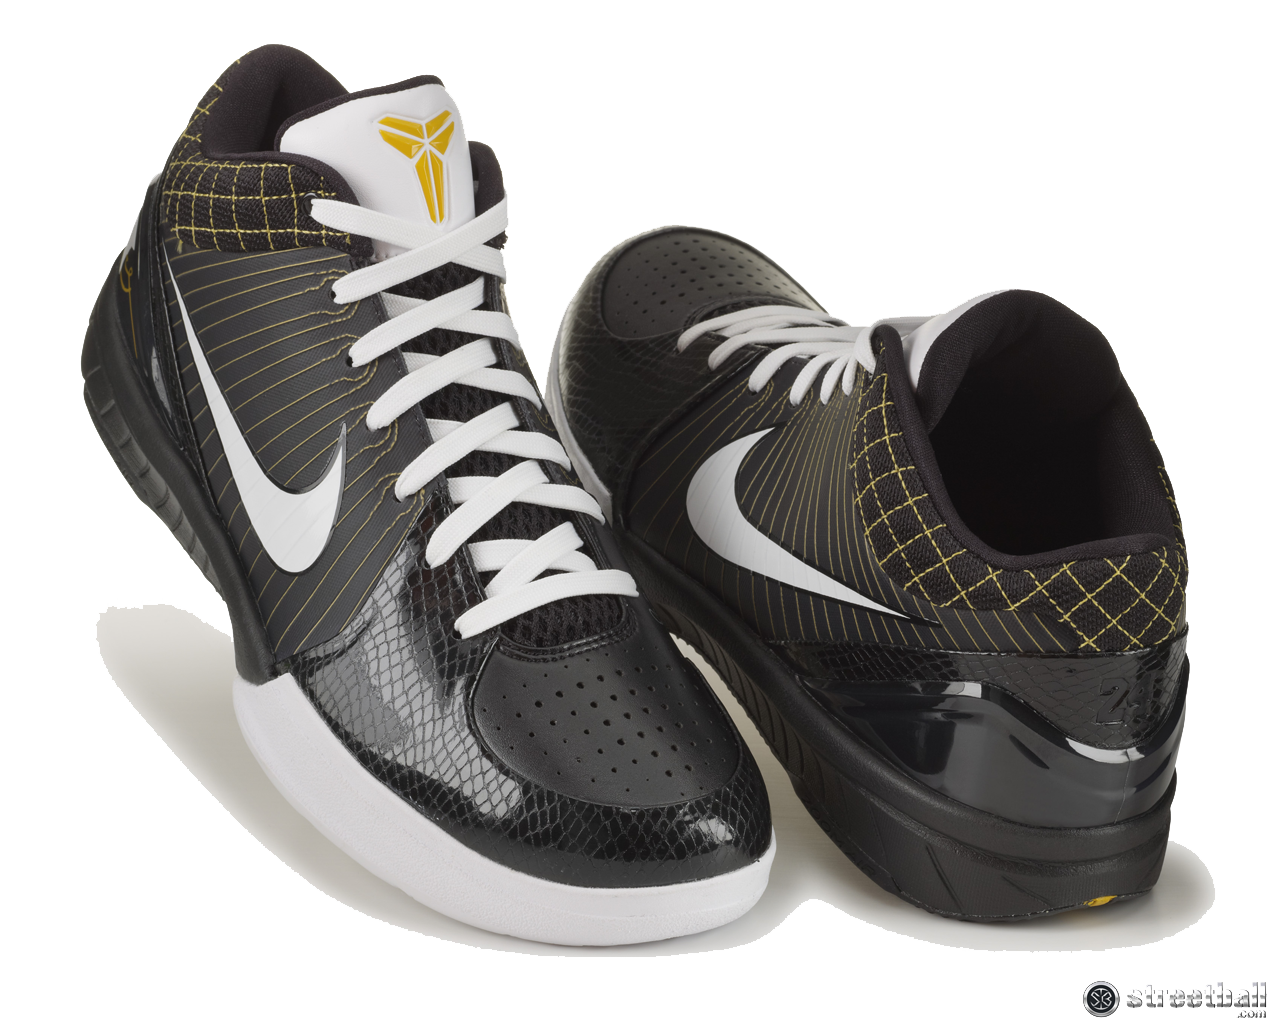 Nike Shoes Png Image - Dance Shoes, Transparent background PNG HD thumbnail